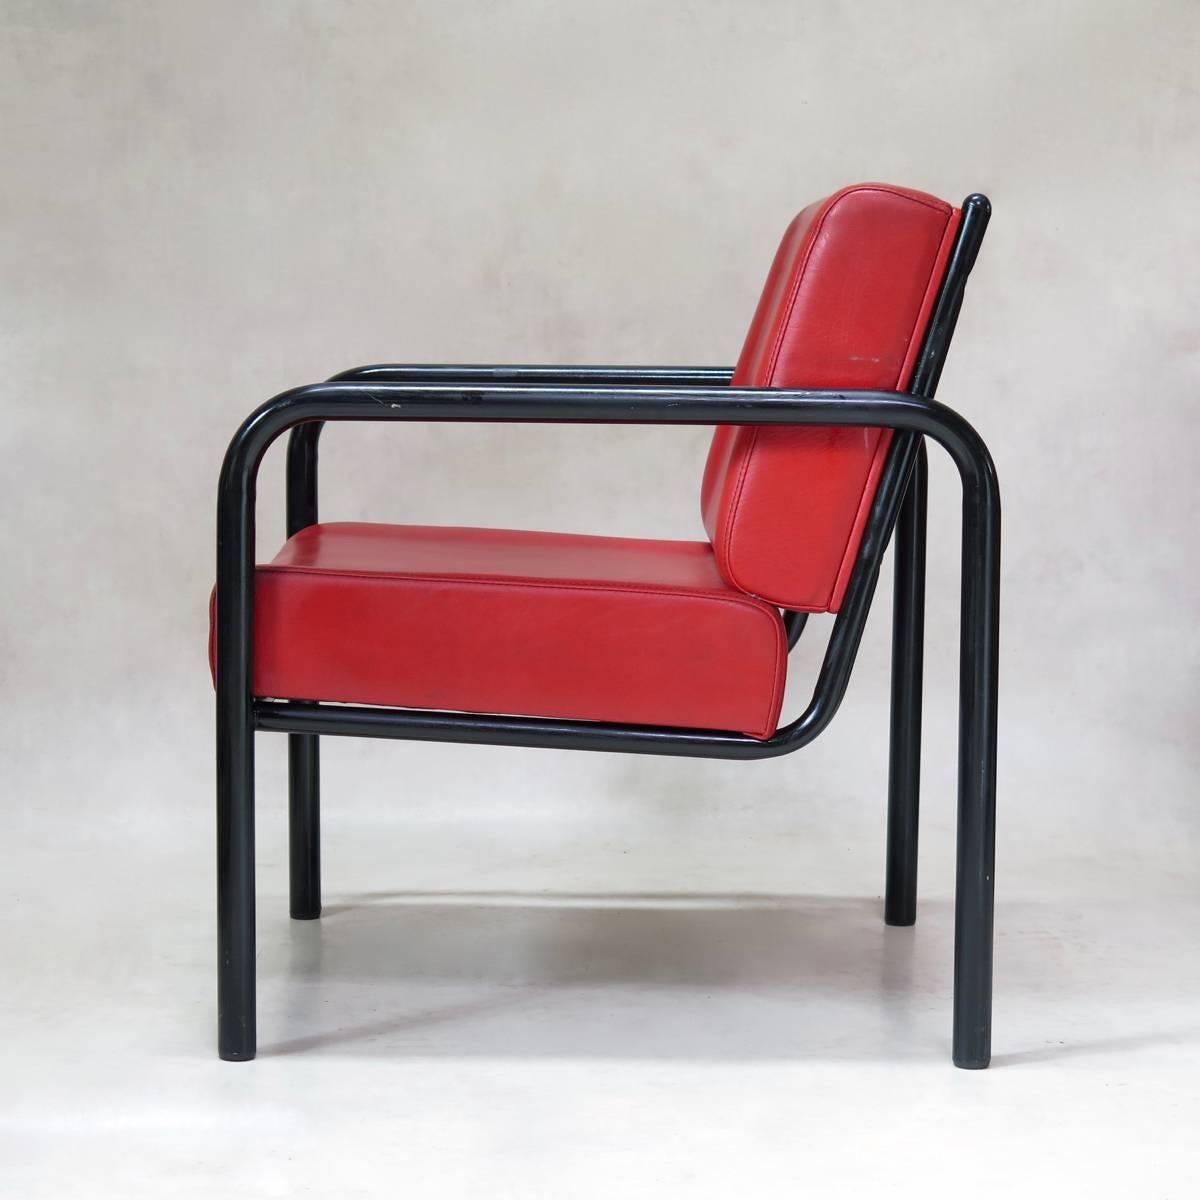 French Tubular Metal and Faux Leather Armchair, France, circa 1950s For Sale